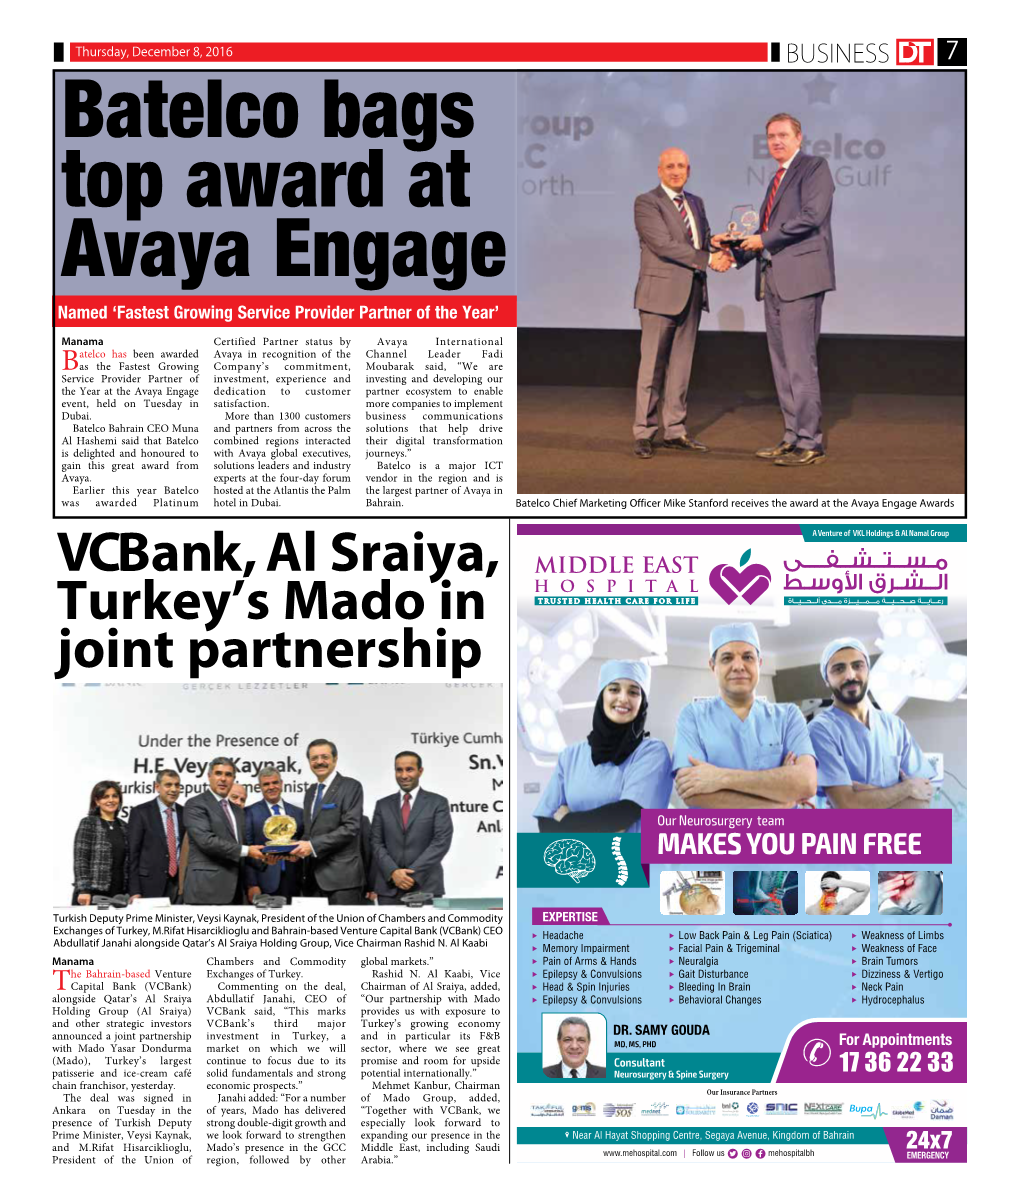 Batelco Bags Top Award at Avaya Engage Named ‘Fastest Growing Service Provider Partner of the Year’